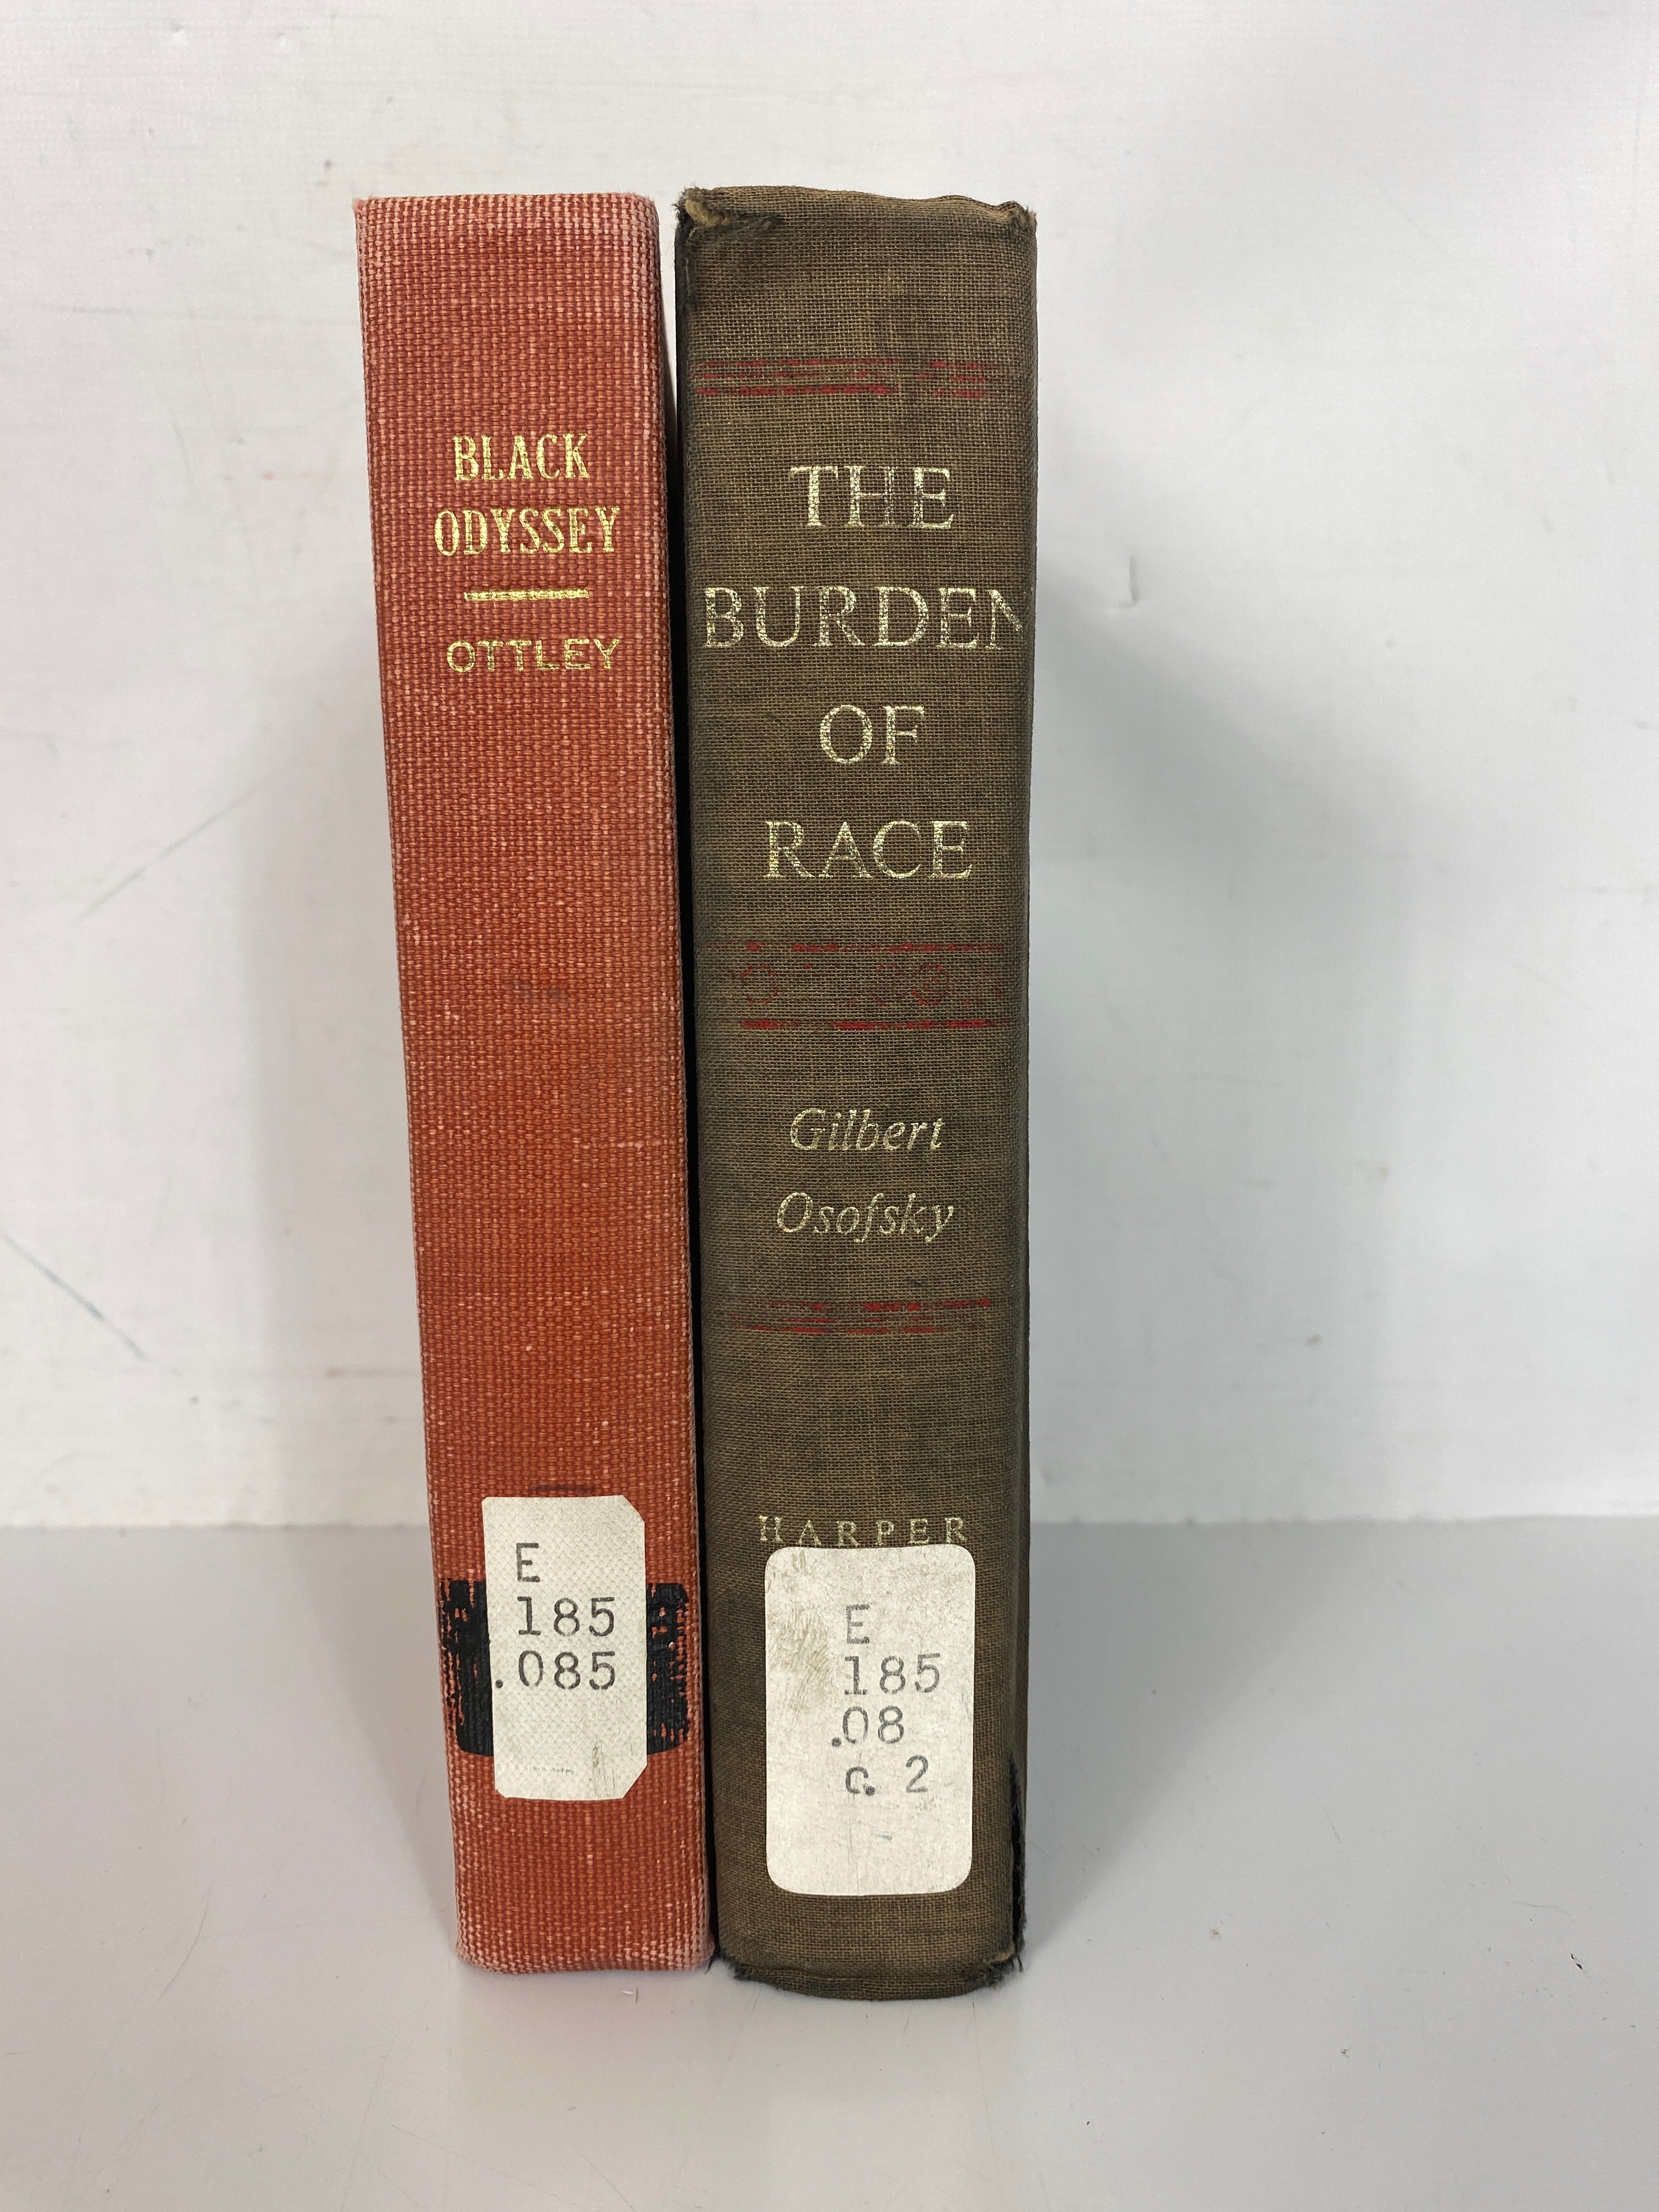 Lot of 2 First Editions 1948-1967 HC ExLib